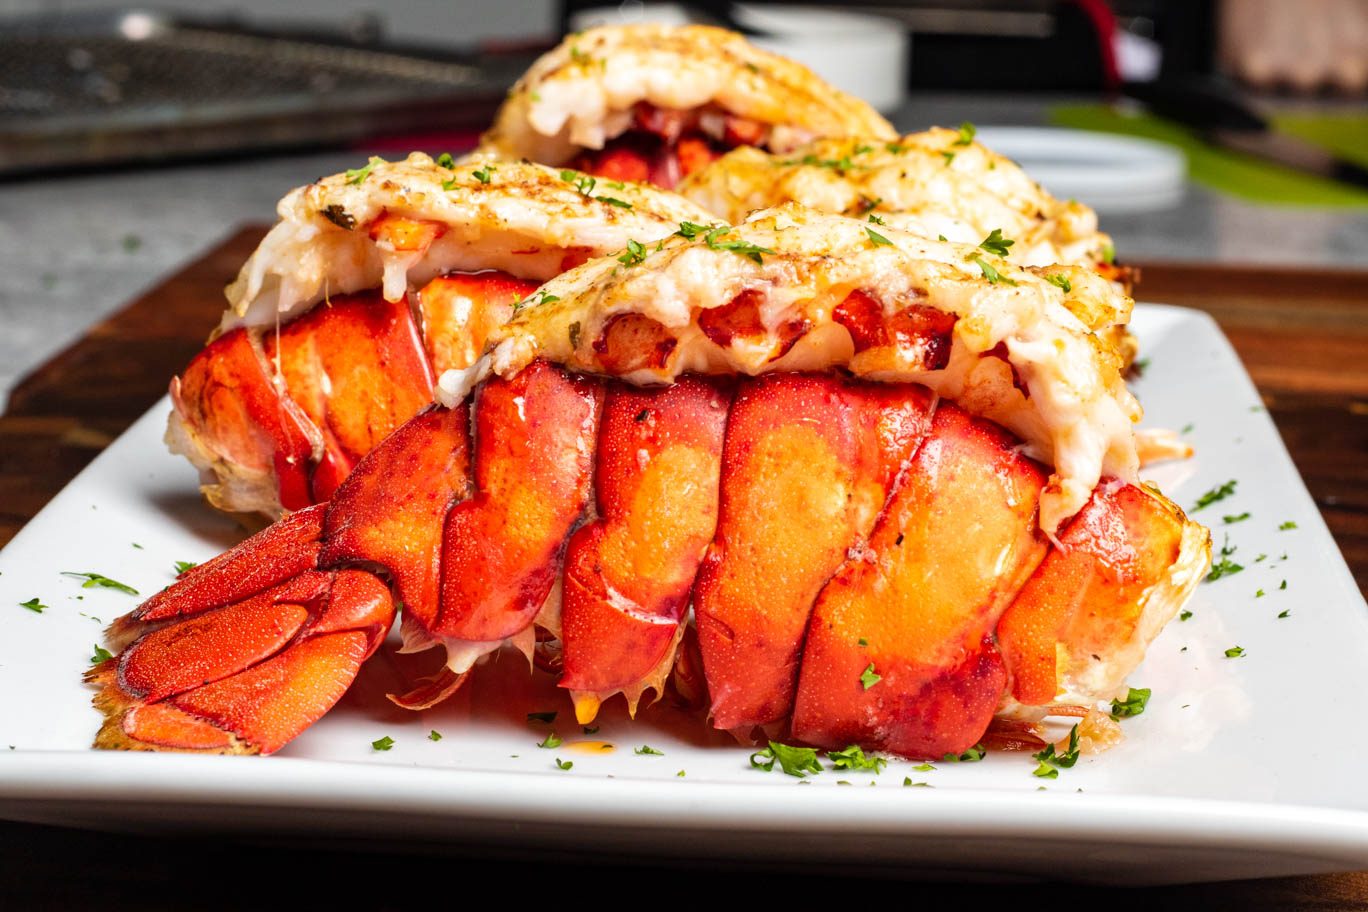 Baked Lobster Tail Recipe (With Lemon Garlic Butter)